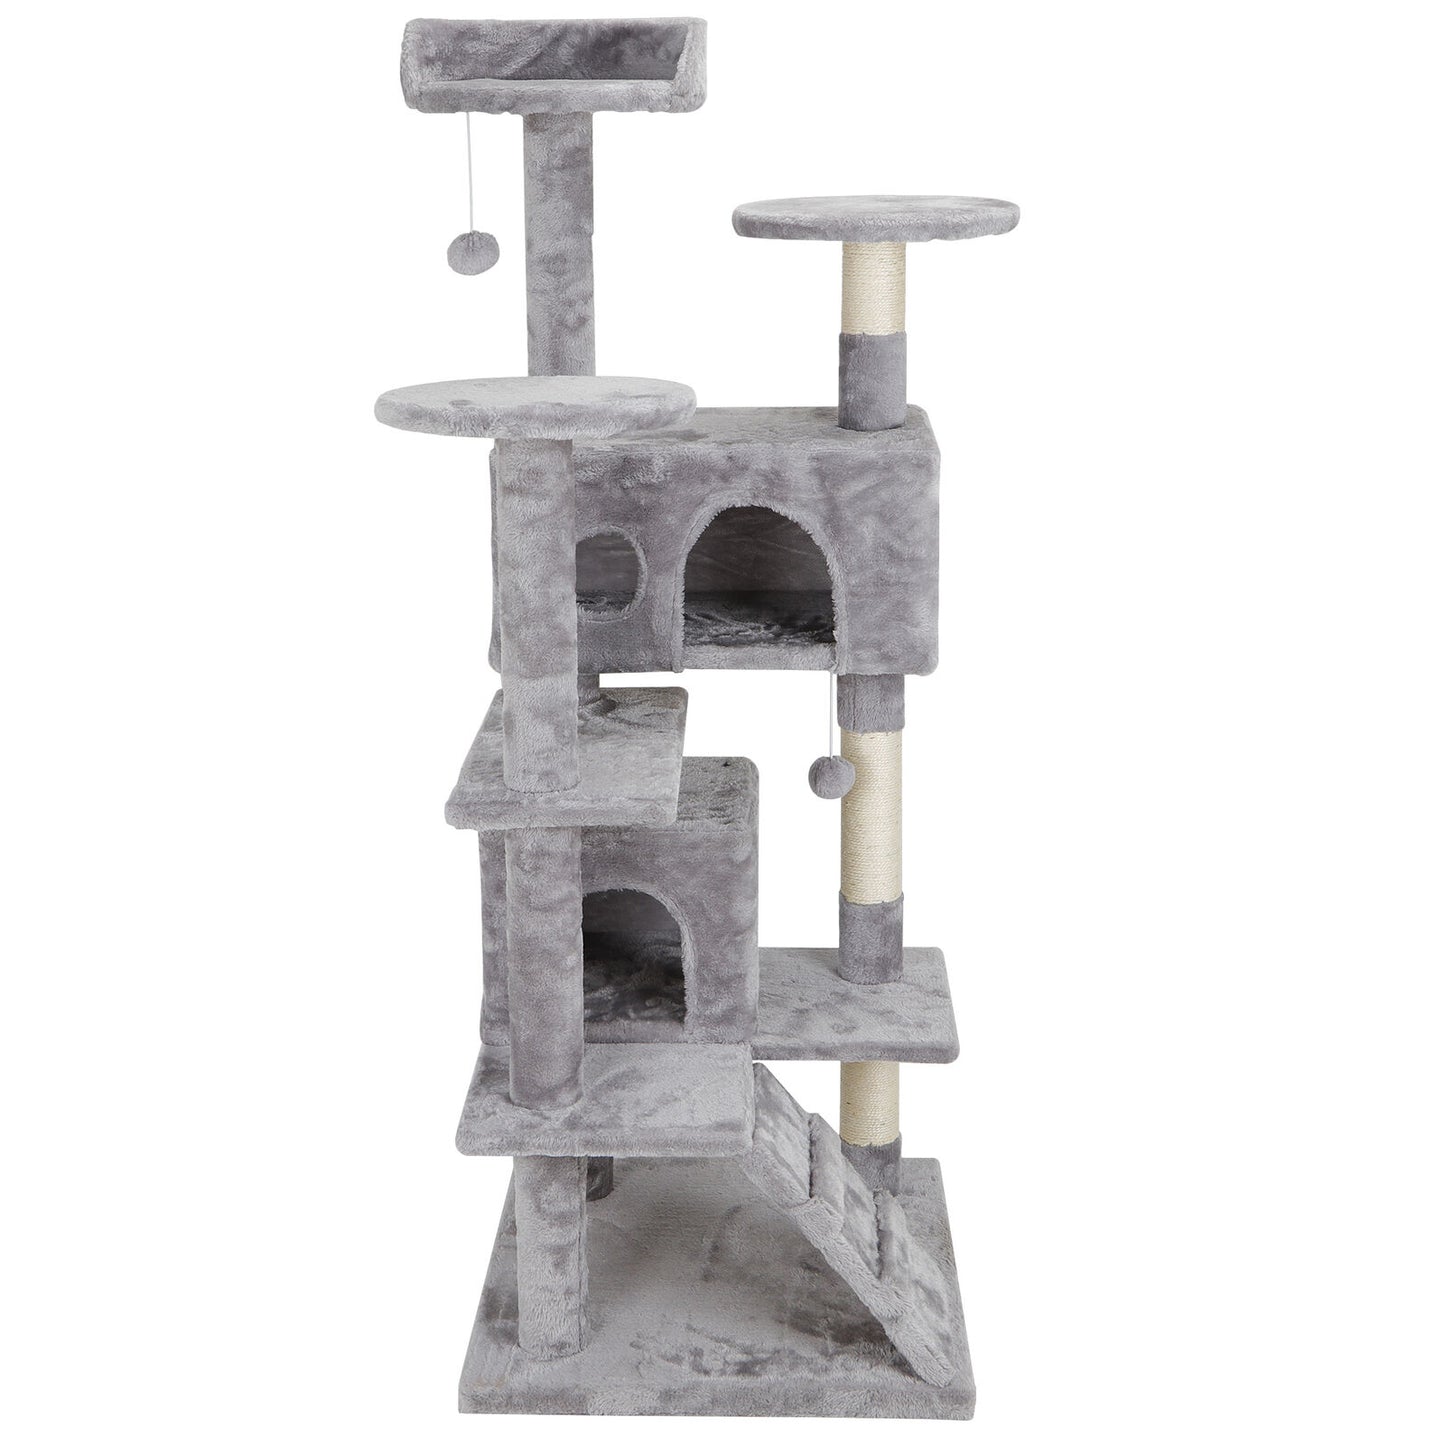 52" Cat Tree Tower Activity Center Large Playing Condo Scratching Rest & Sleep